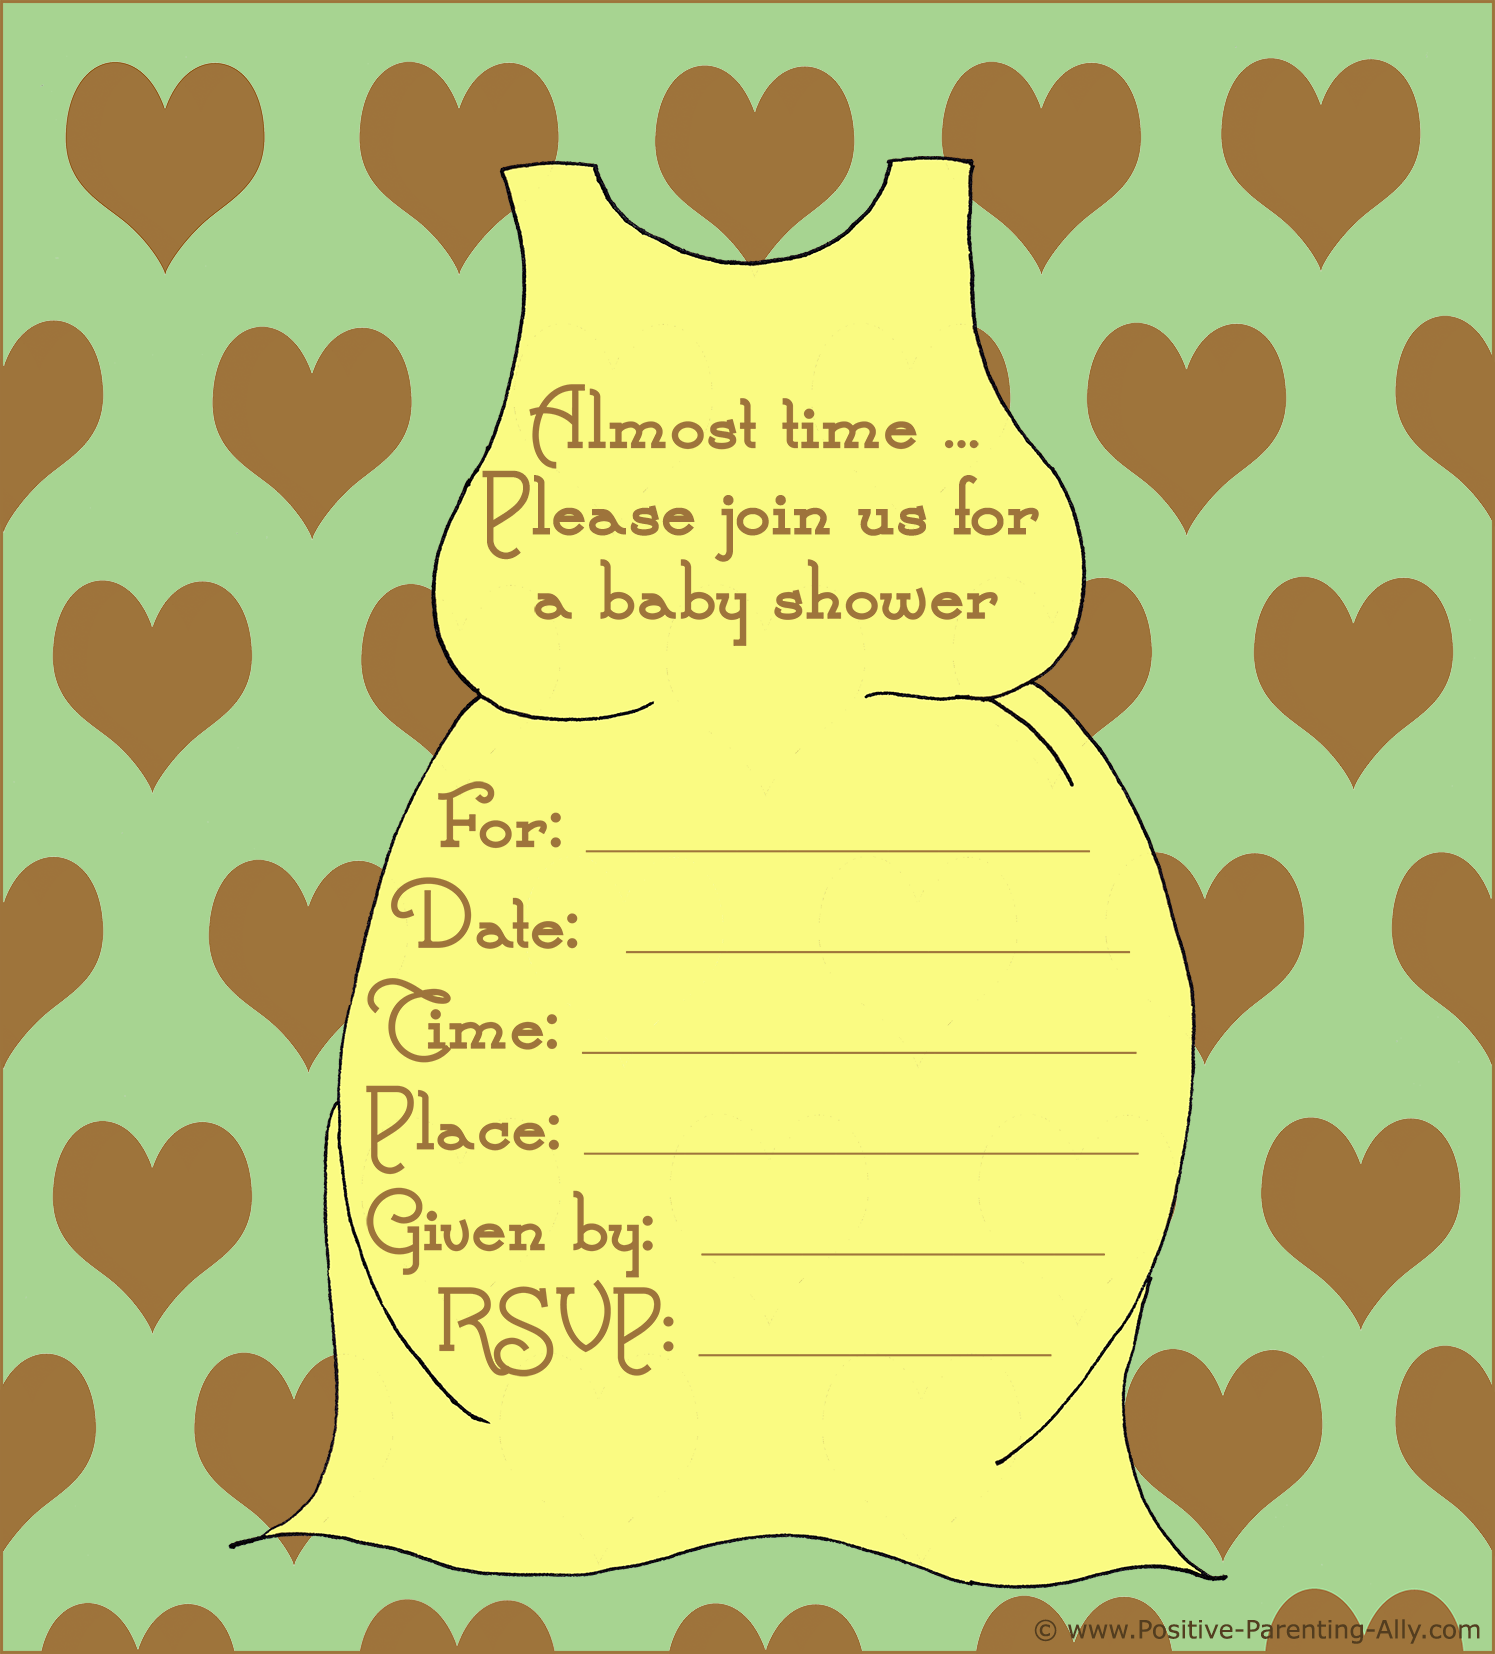 Neutral baby shower invite with pregnant belly dress in retro style.